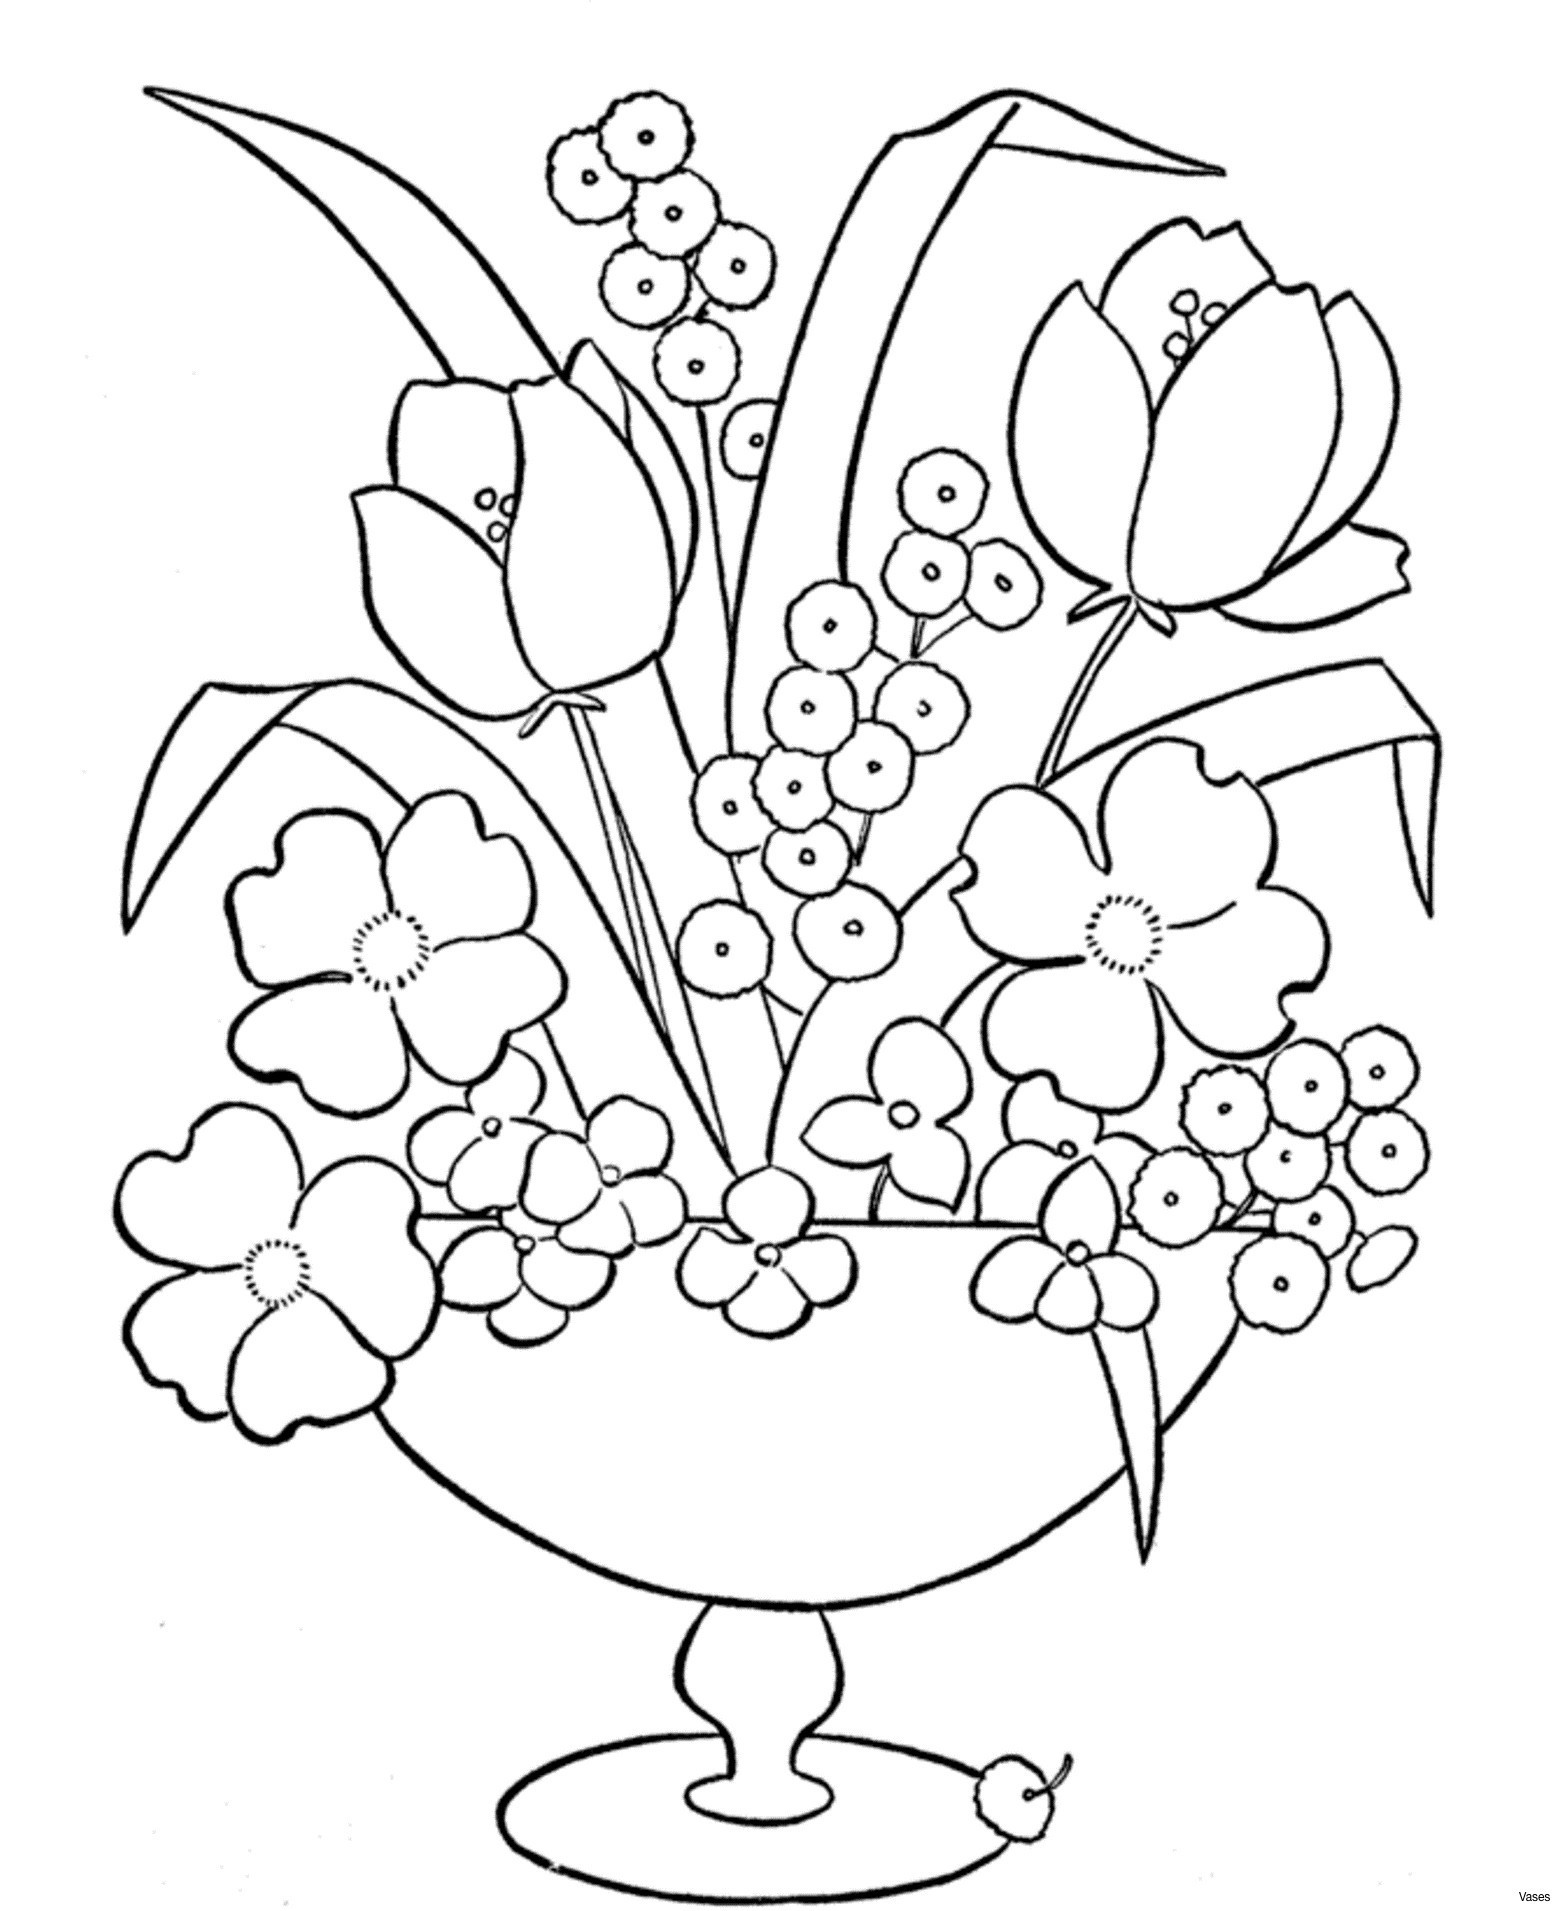 14 Recommended Wide Neck Glass Vase 2024 free download wide neck glass vase of wide glass vase image paint a picture luxury h vases paint vase i 0d with wide glass vase photograph big top coloring pages unique cool vases flower vase coloring pag